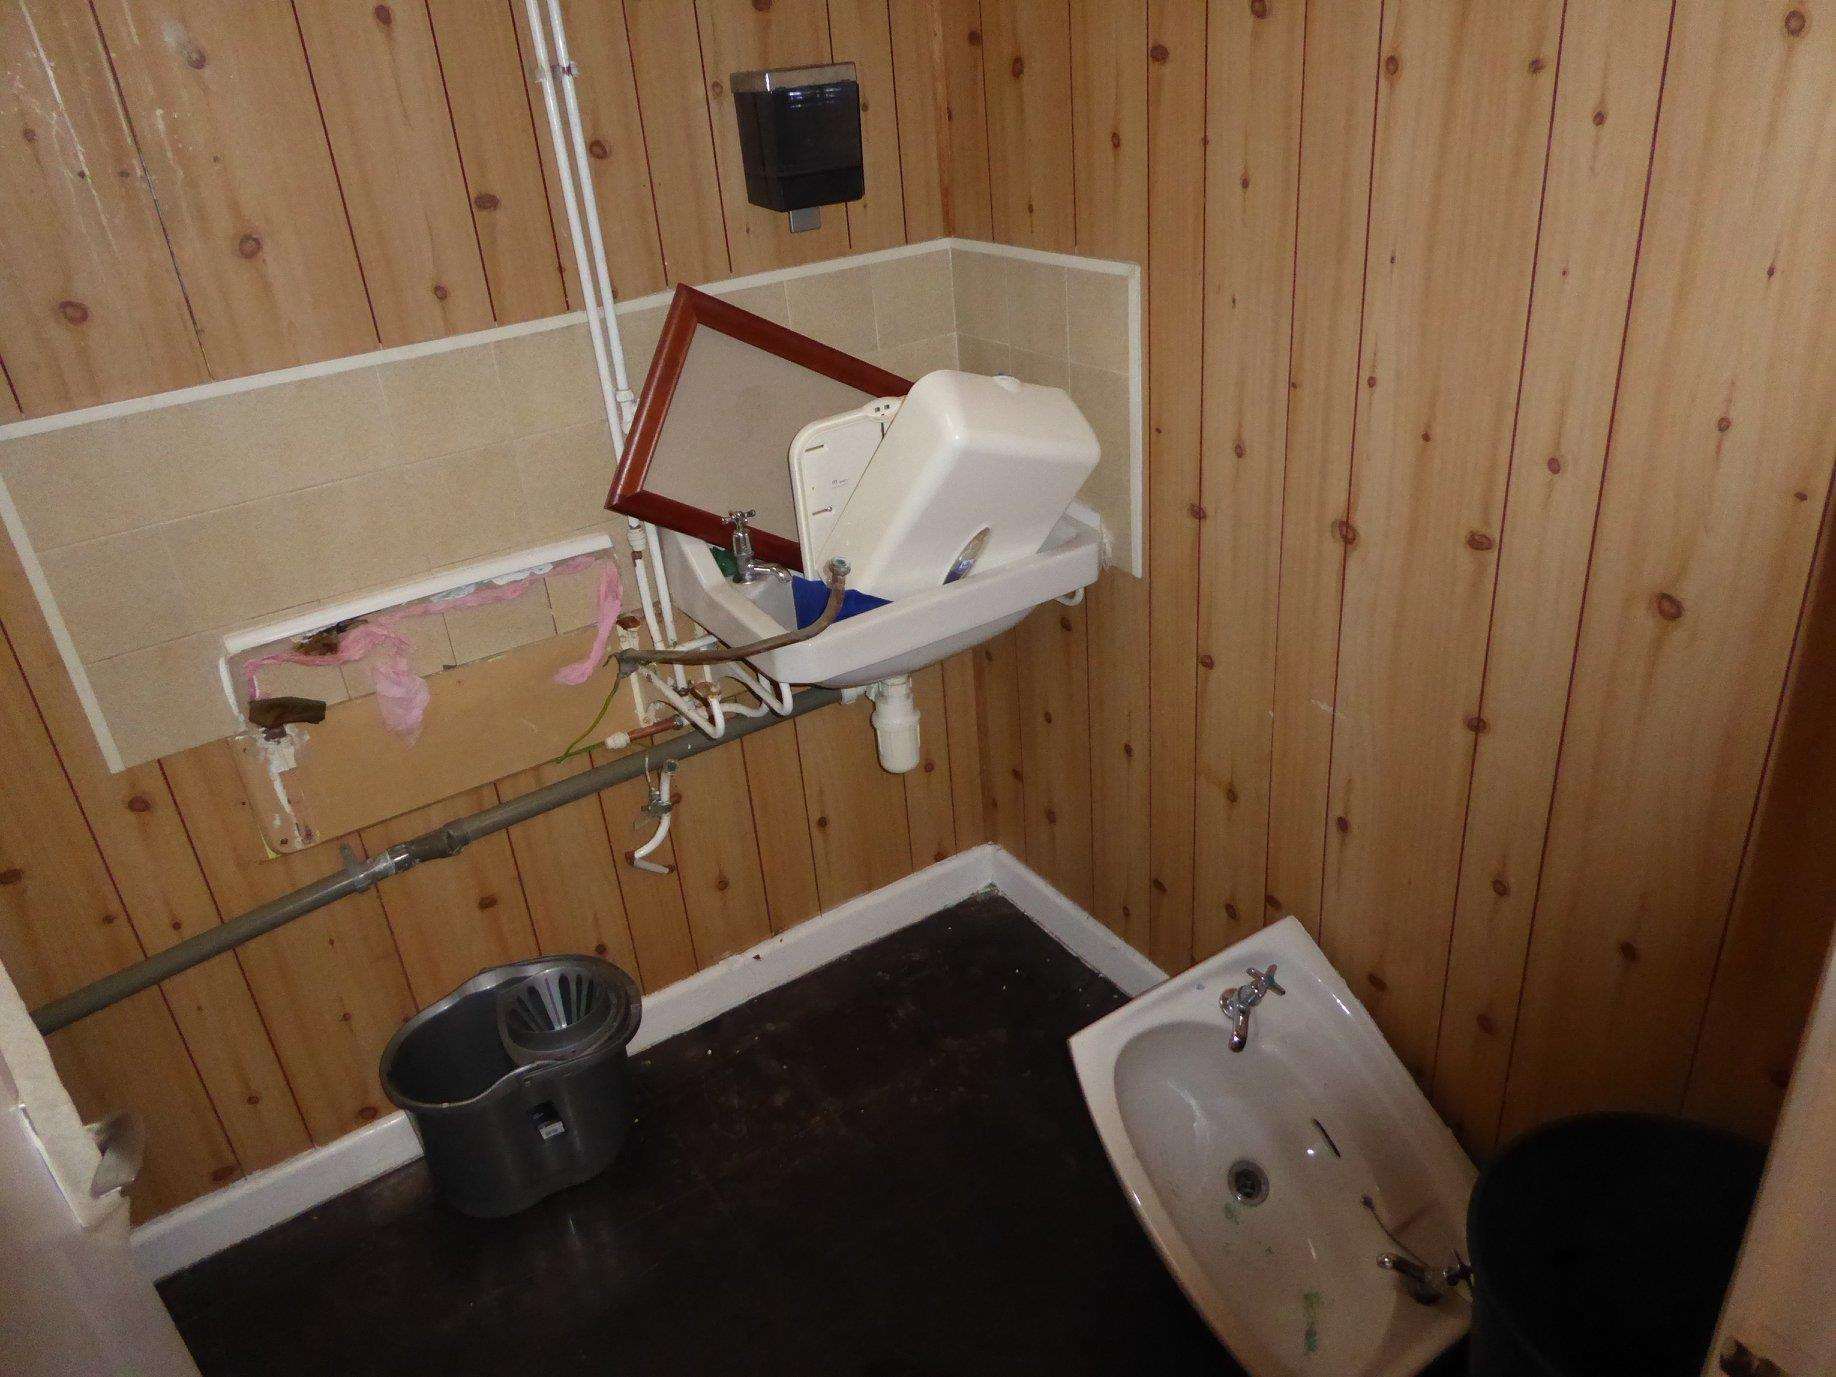 The gents' toilet was flooded following the "mindless vandalism"